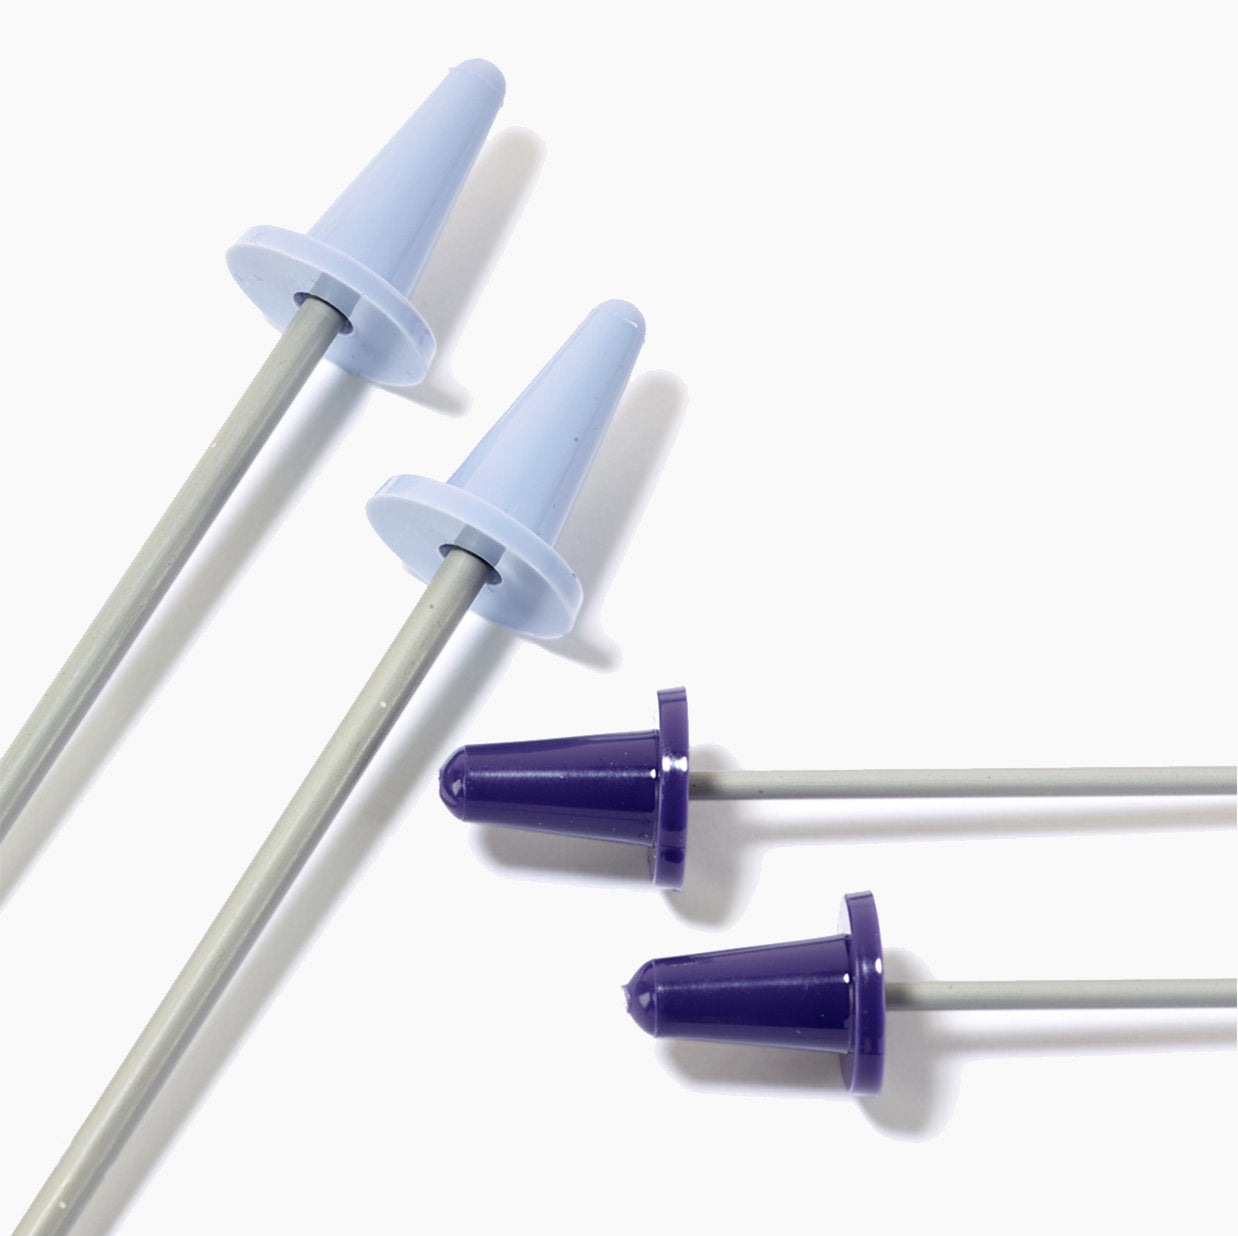 Prym 611870 Stitch Protectors - Stitch Stoppers for Knitting Needles